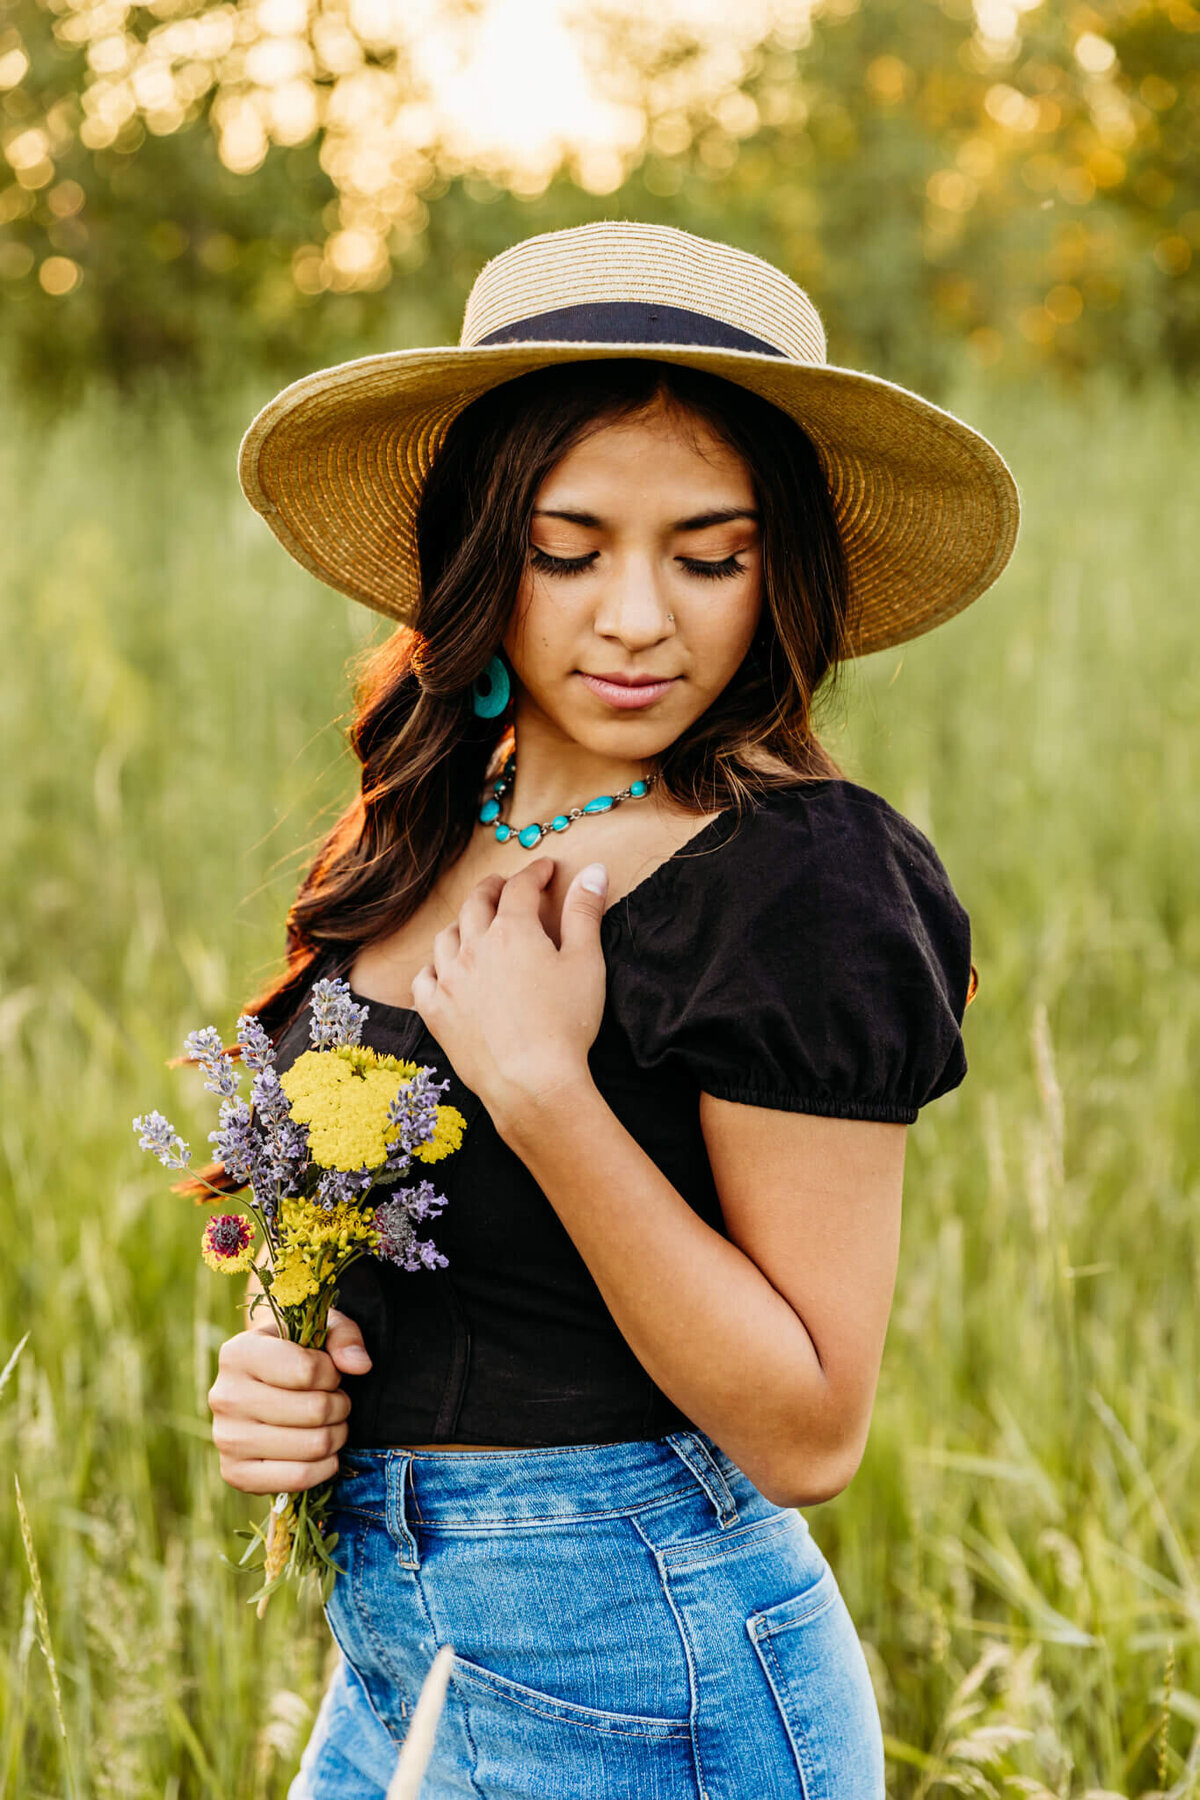 stunning teen girl in a sun hat holding a bouquet and glancing down as she touches her necklace in a beautiful nature scene near Appleton WI